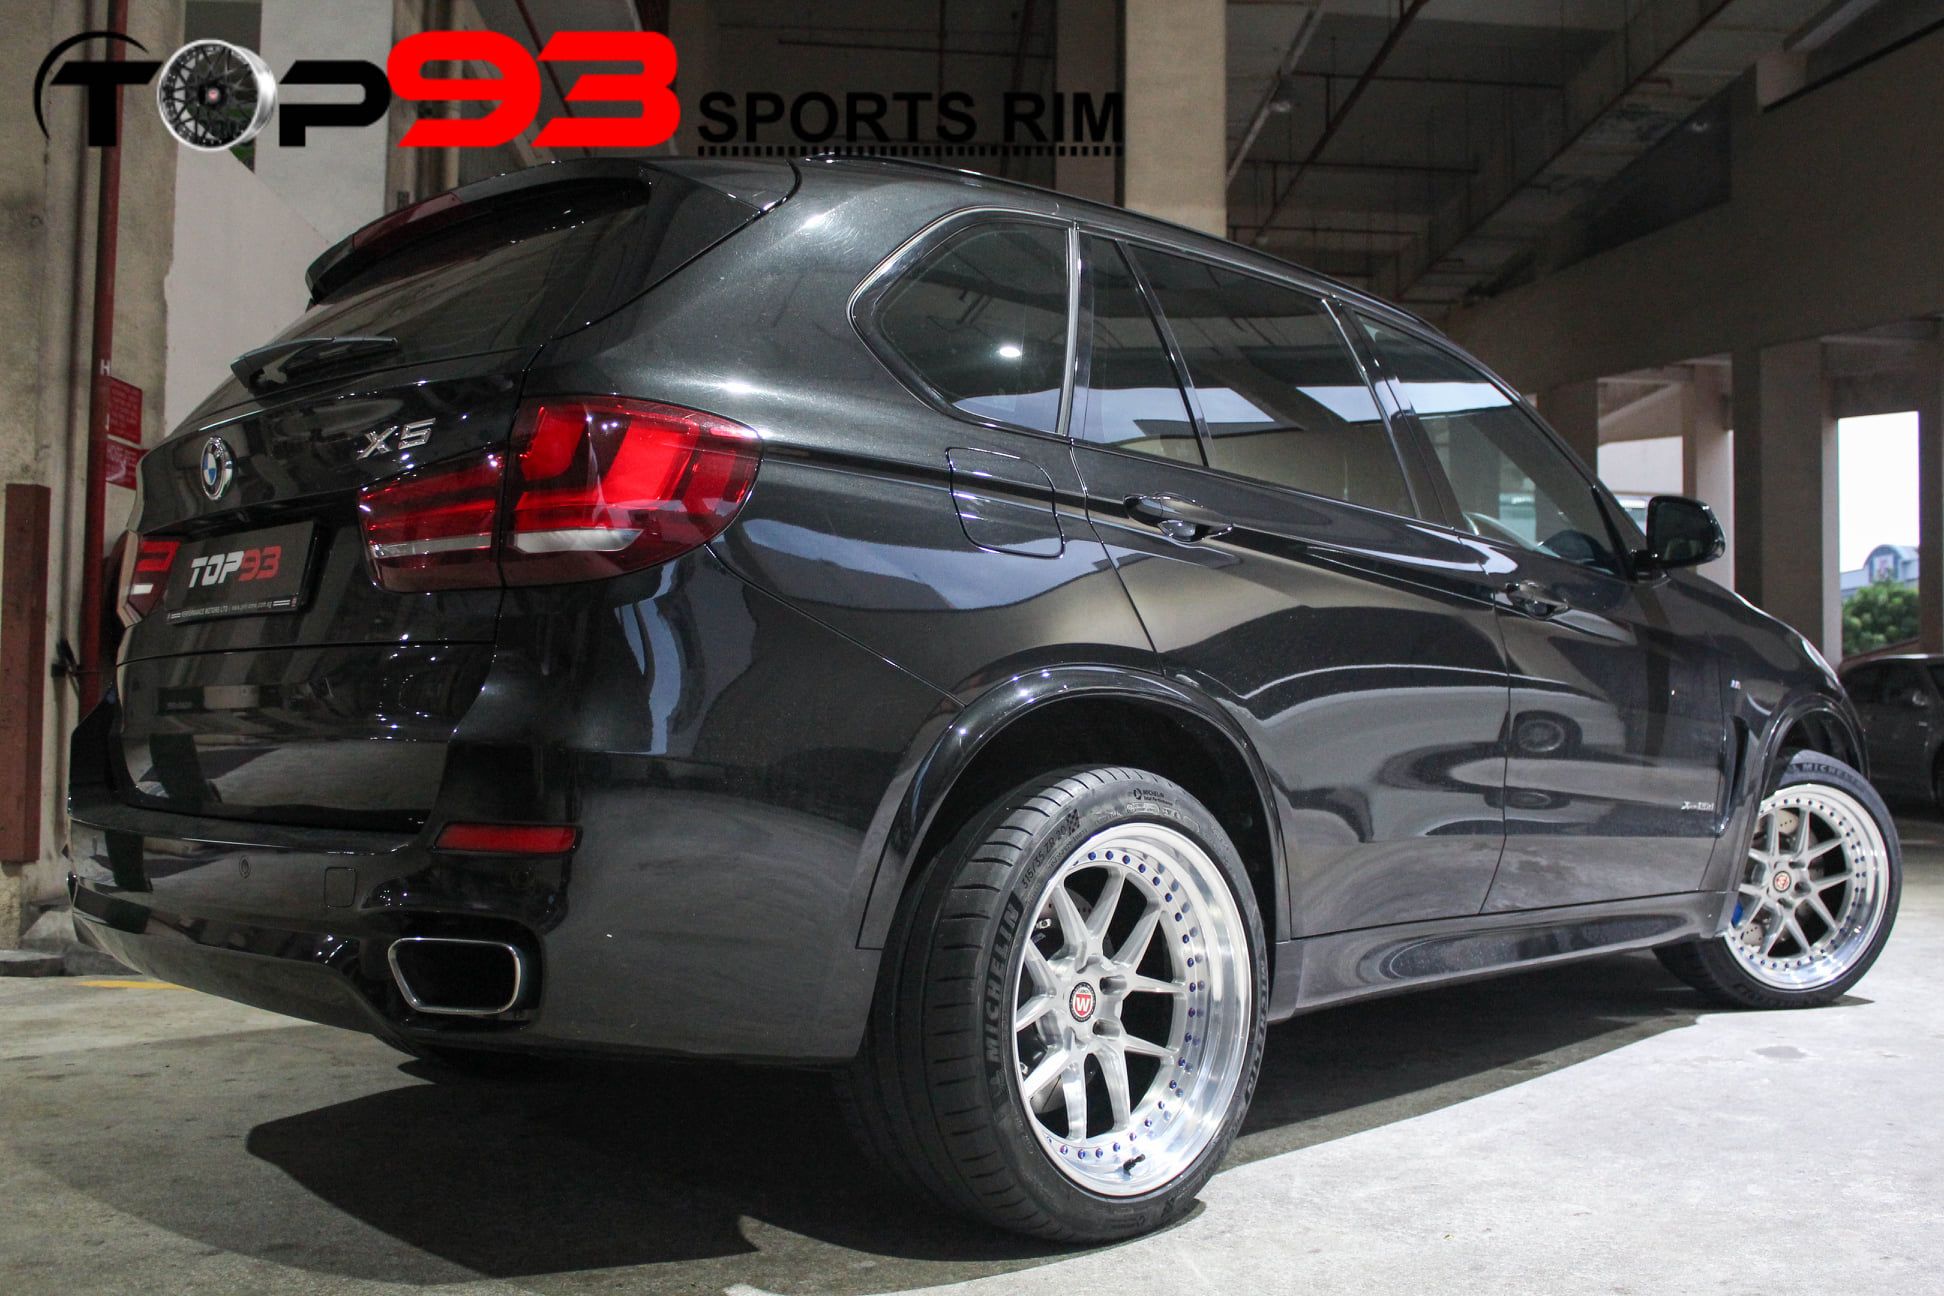 https://wheelfront.com/wp-content/uploads/formidable/8/bmw-f15-x5-with-silver-bc-forged-mle52-wheels-1.jpeg